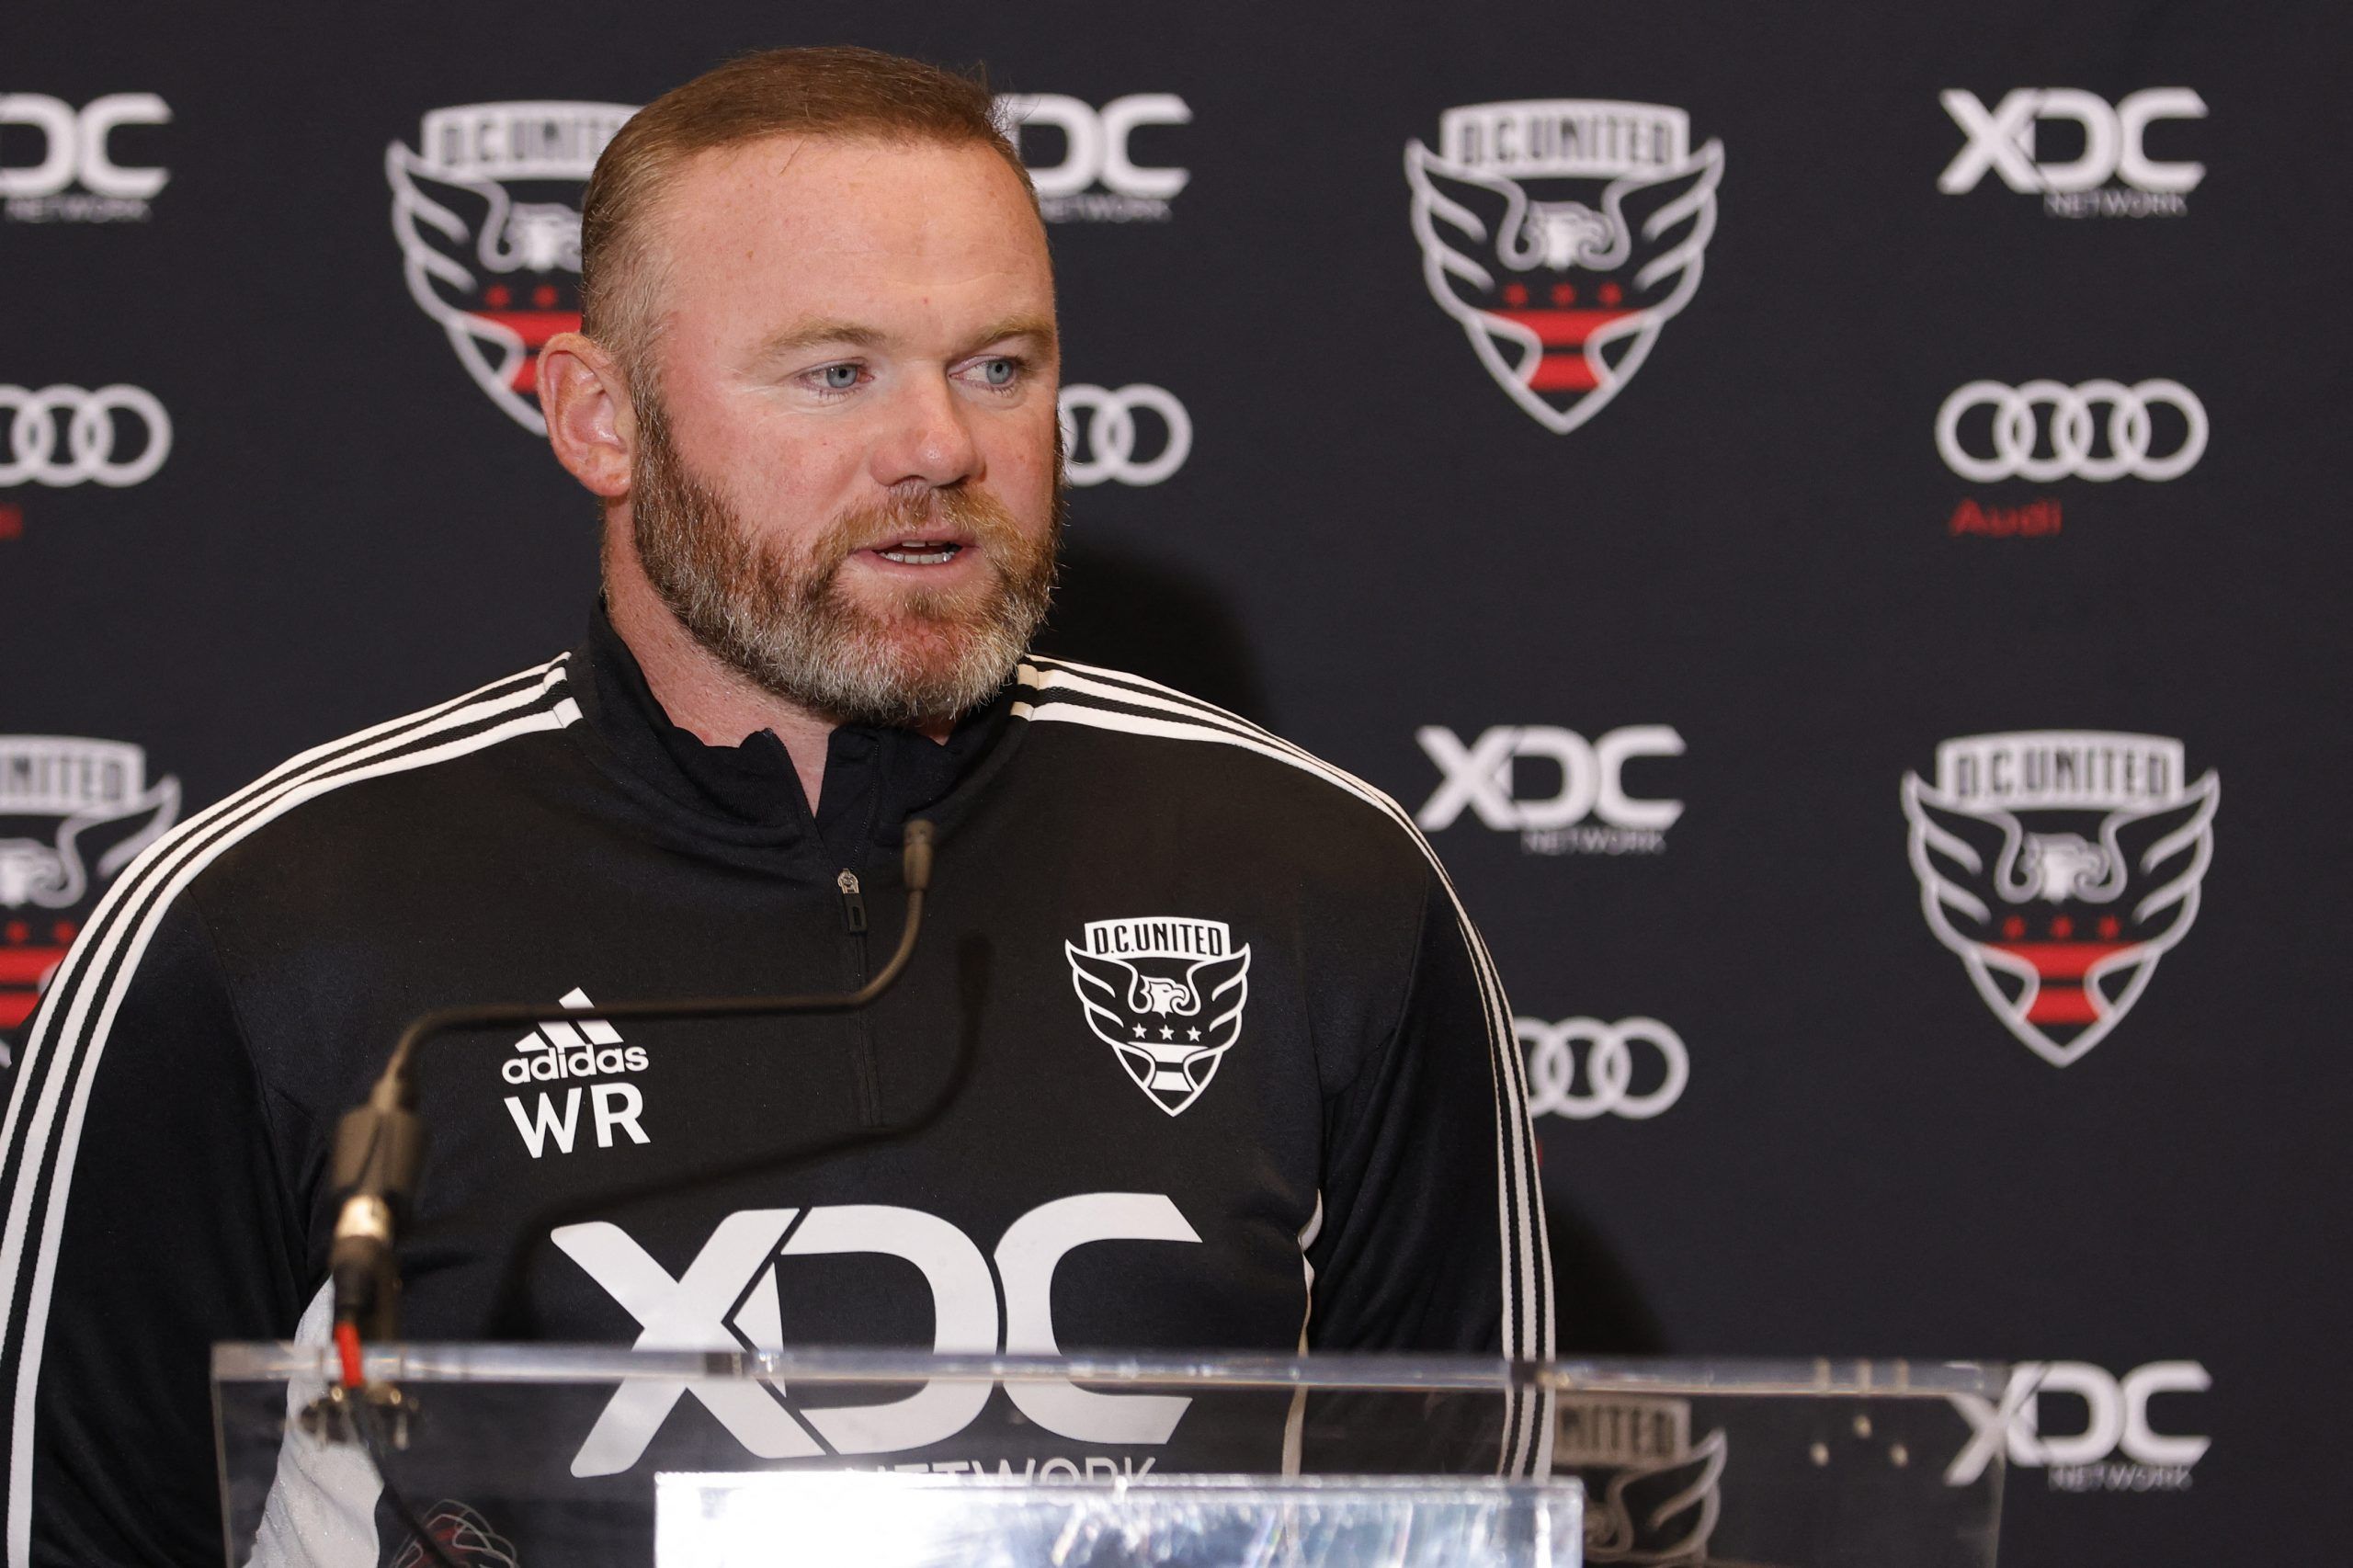 Jul 12, 2022; Washington, DC, USA; D.C. United new head coach Wayne Rooney speaks at an introductory press conference at Audi Field. Mandatory Credit: Geoff Burke-USA TODAY Sports